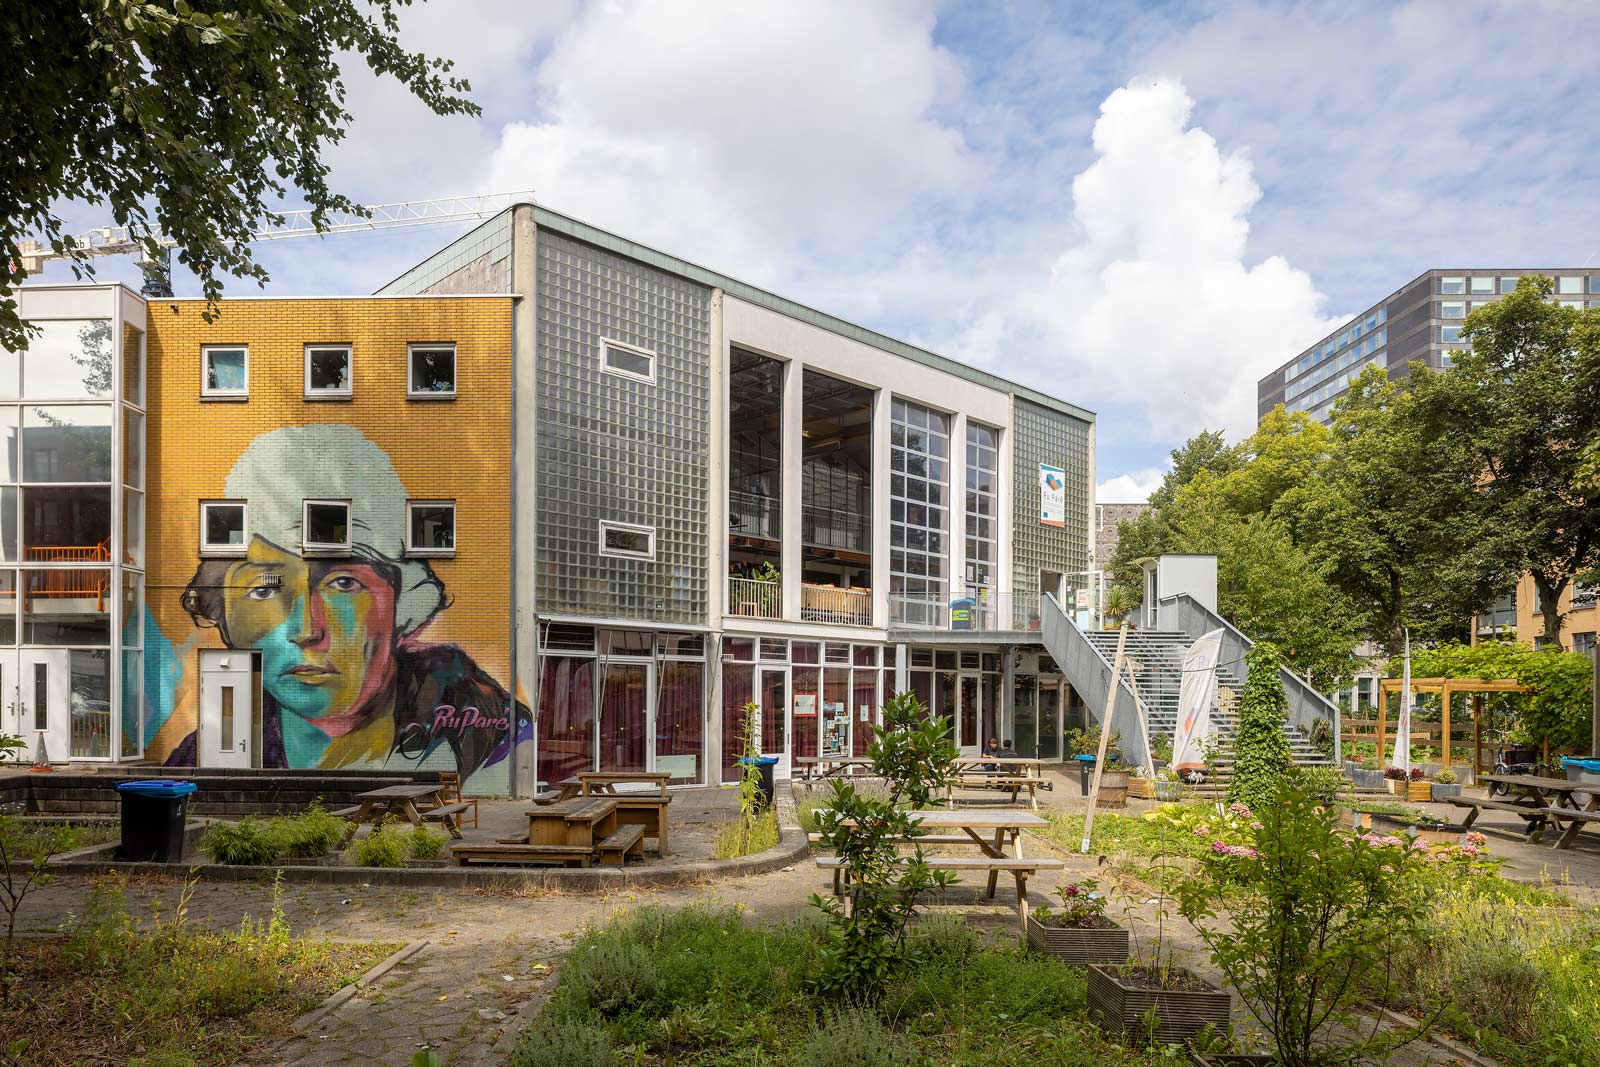 Ru Paré Community voted the best building of Amsterdam from the past 15 years